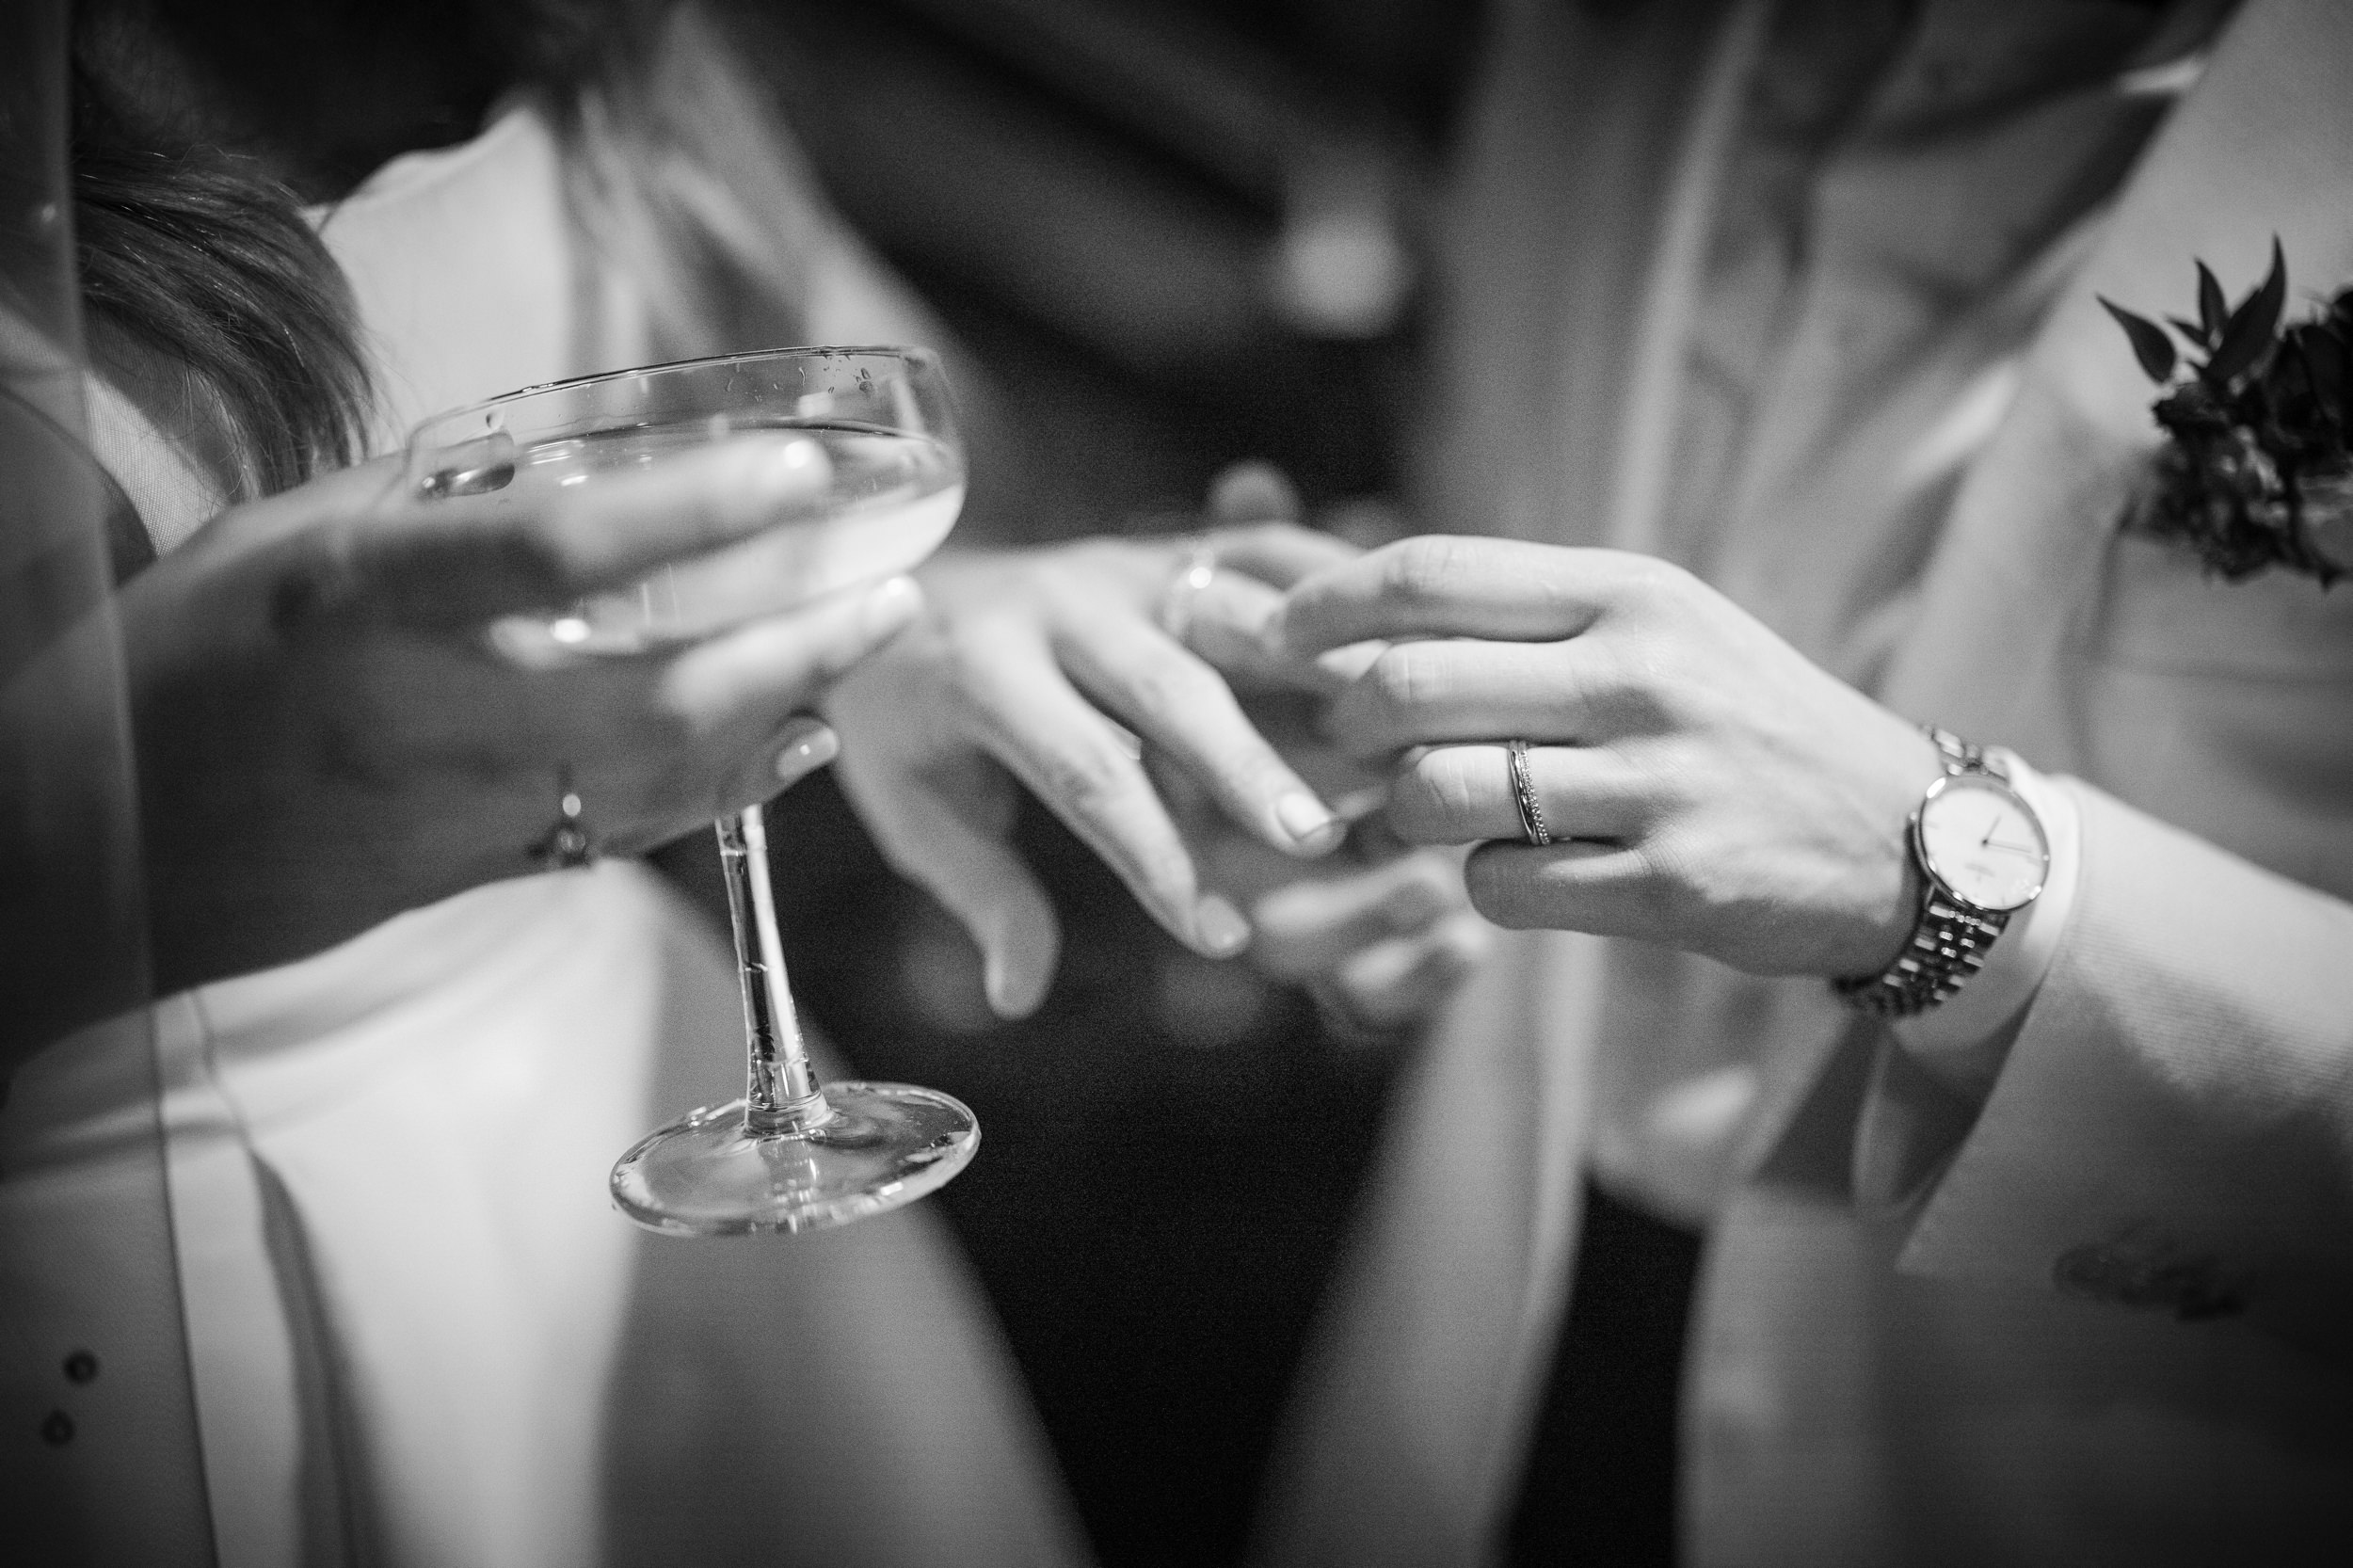 Brides examine each other's wedding rings at a Beekman Hotel wedding in NYC